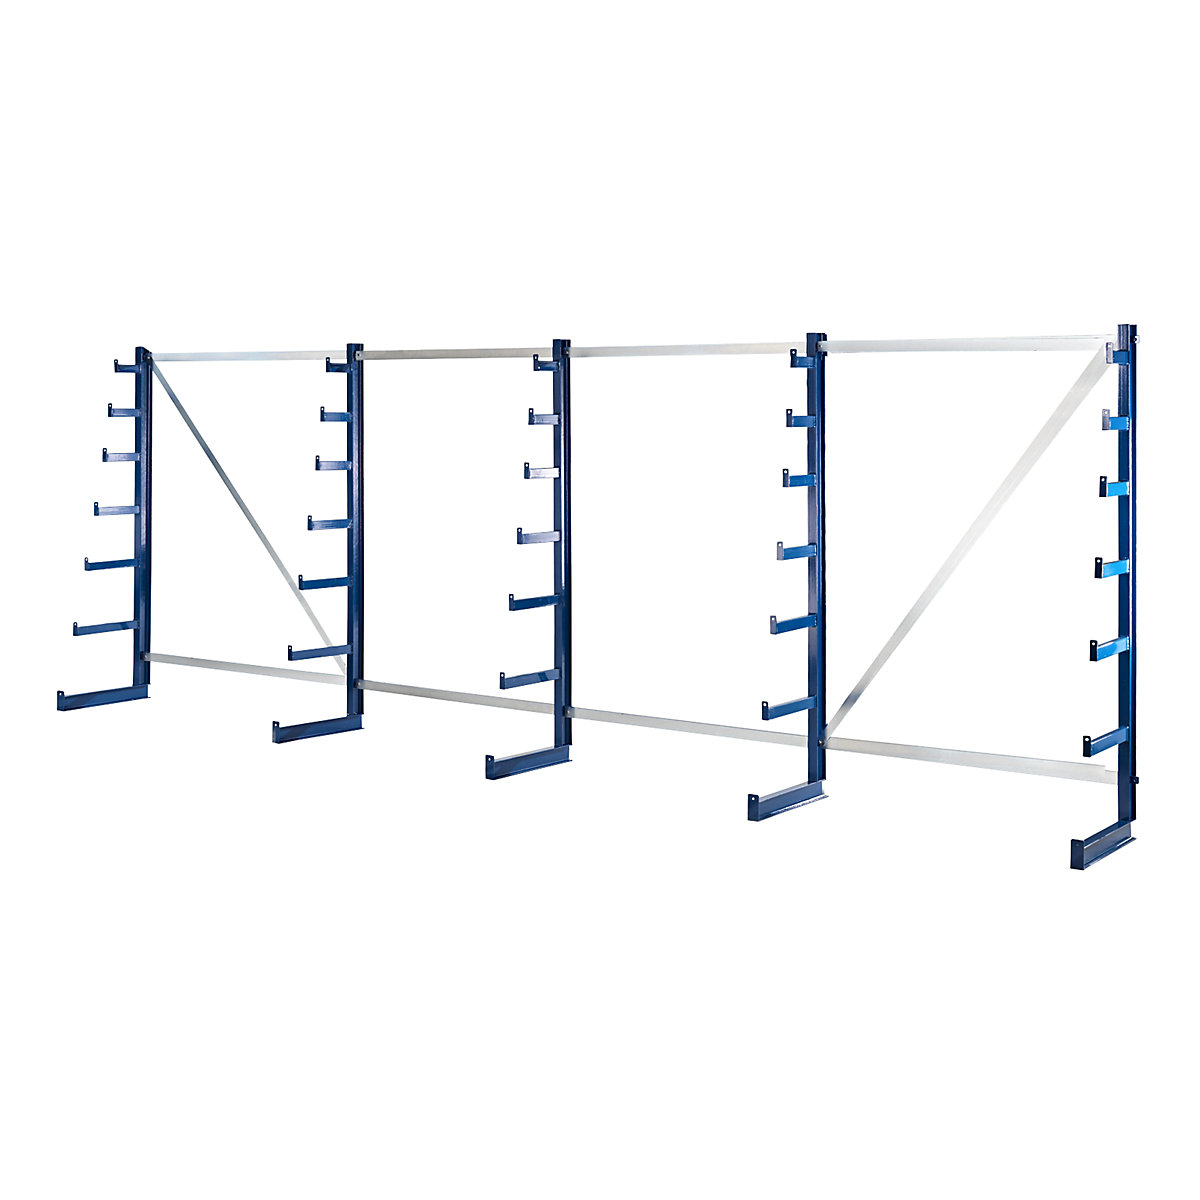 Cantilever racking unit with cantilever arms which taper towards the top - eurokraft pro